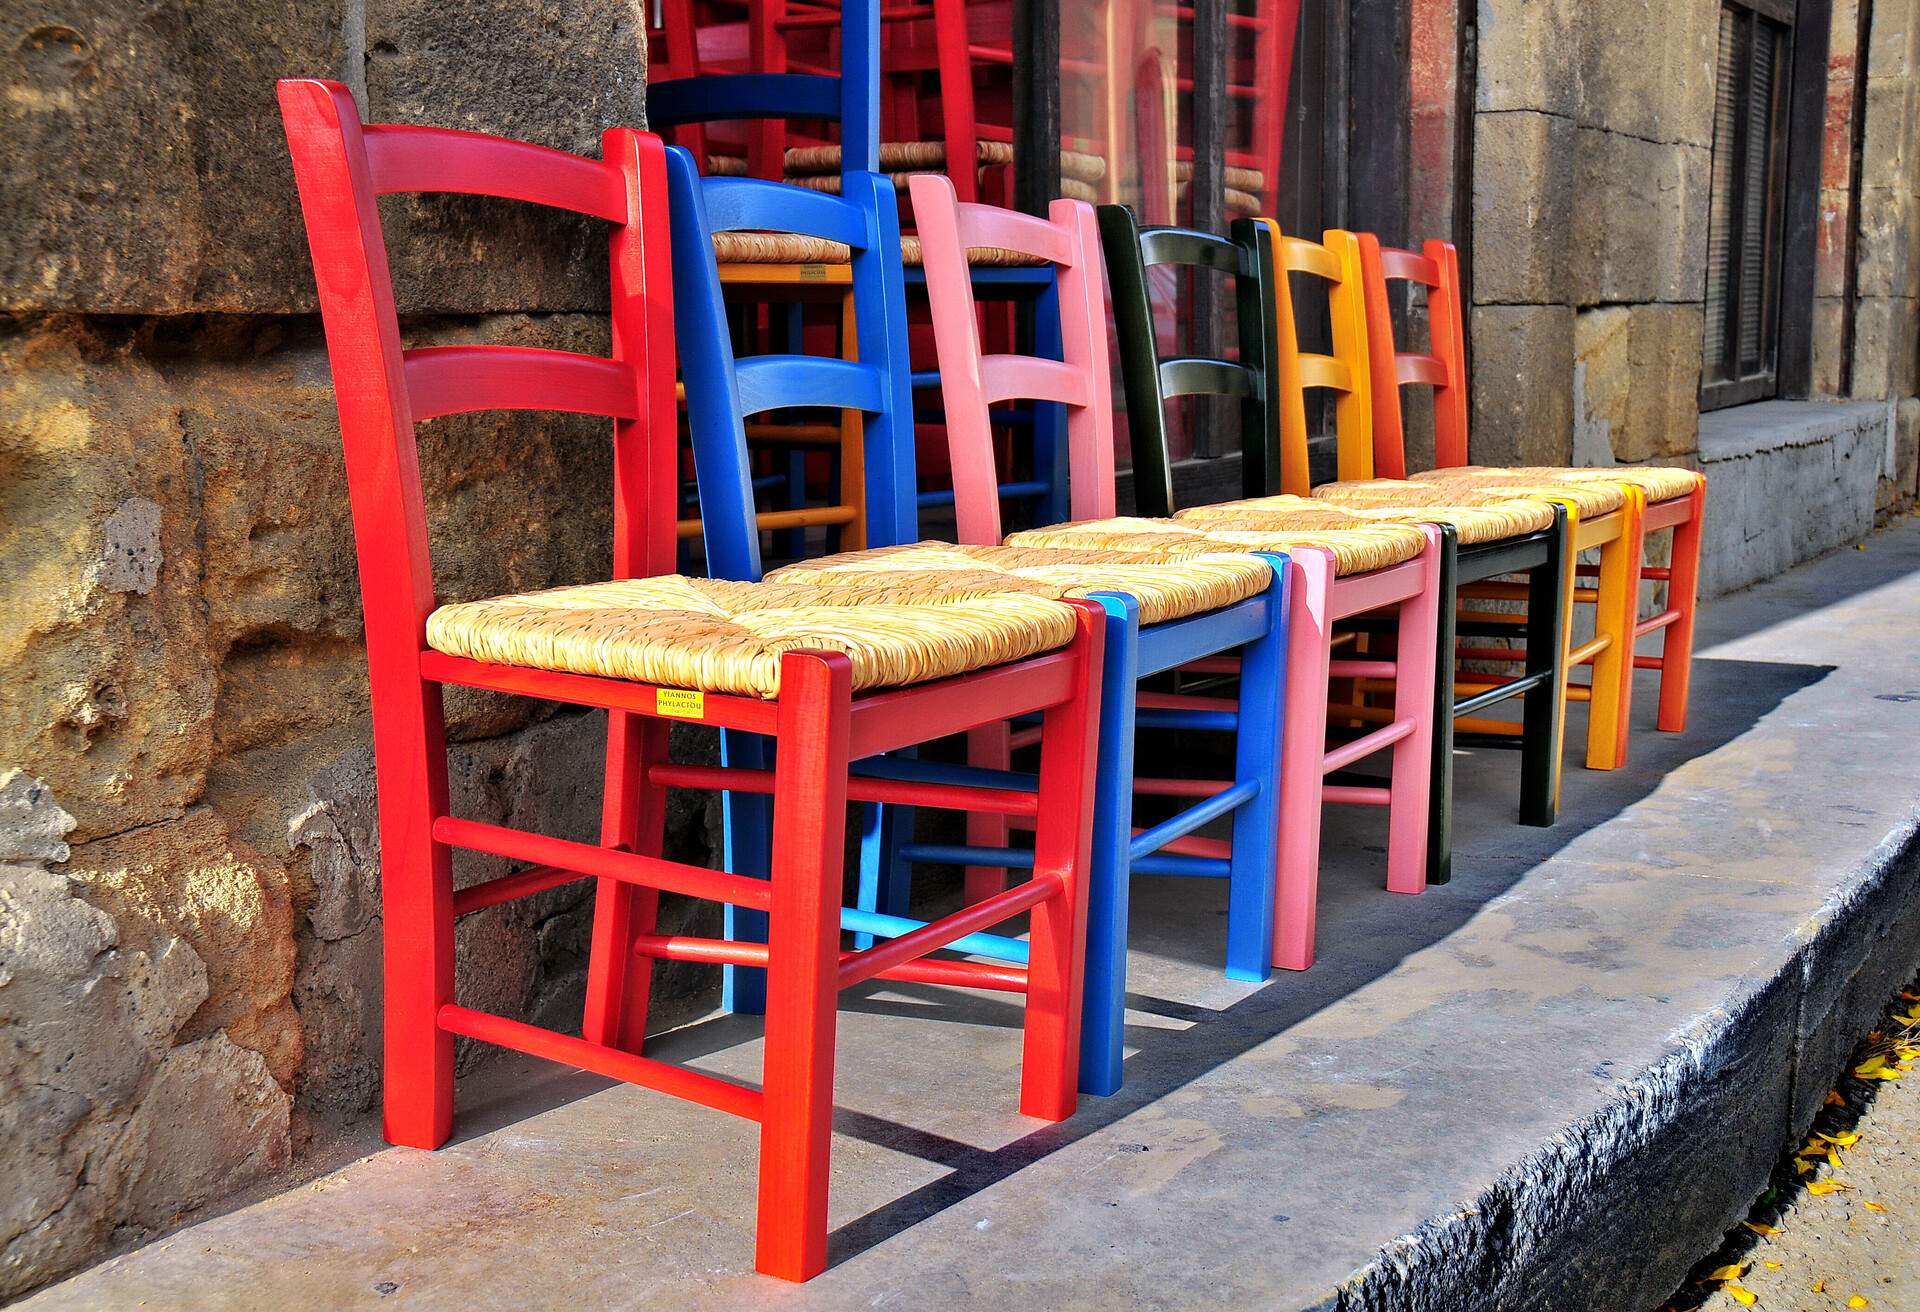 Colourful children's chairs as exhibited outside a traditional Cypriot chair maker's workshop at Old Strovolos, Nicosia.